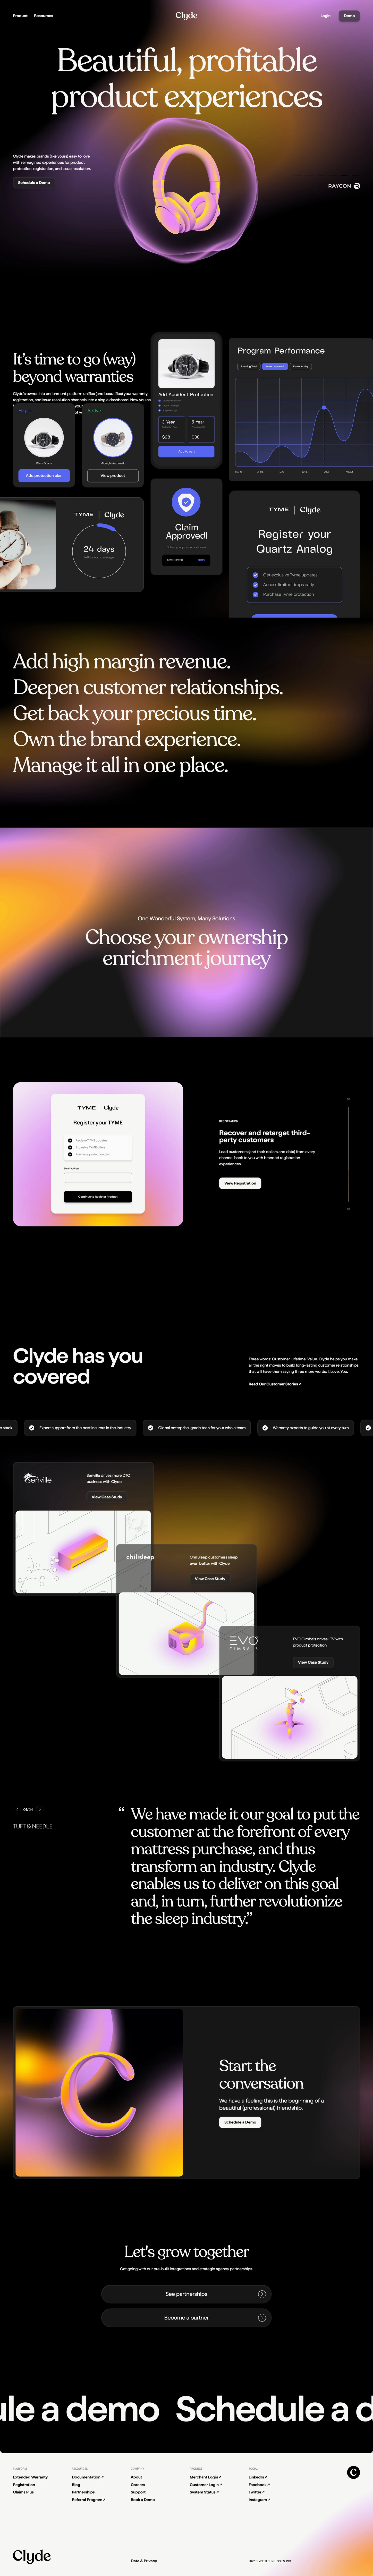 Clyde Landing Page Example: Clyde's ownership enrichment platform helps brands deepen customer relationships and drive customer lifetime value with extended warranties, product registration, and efficient issue resolutions.